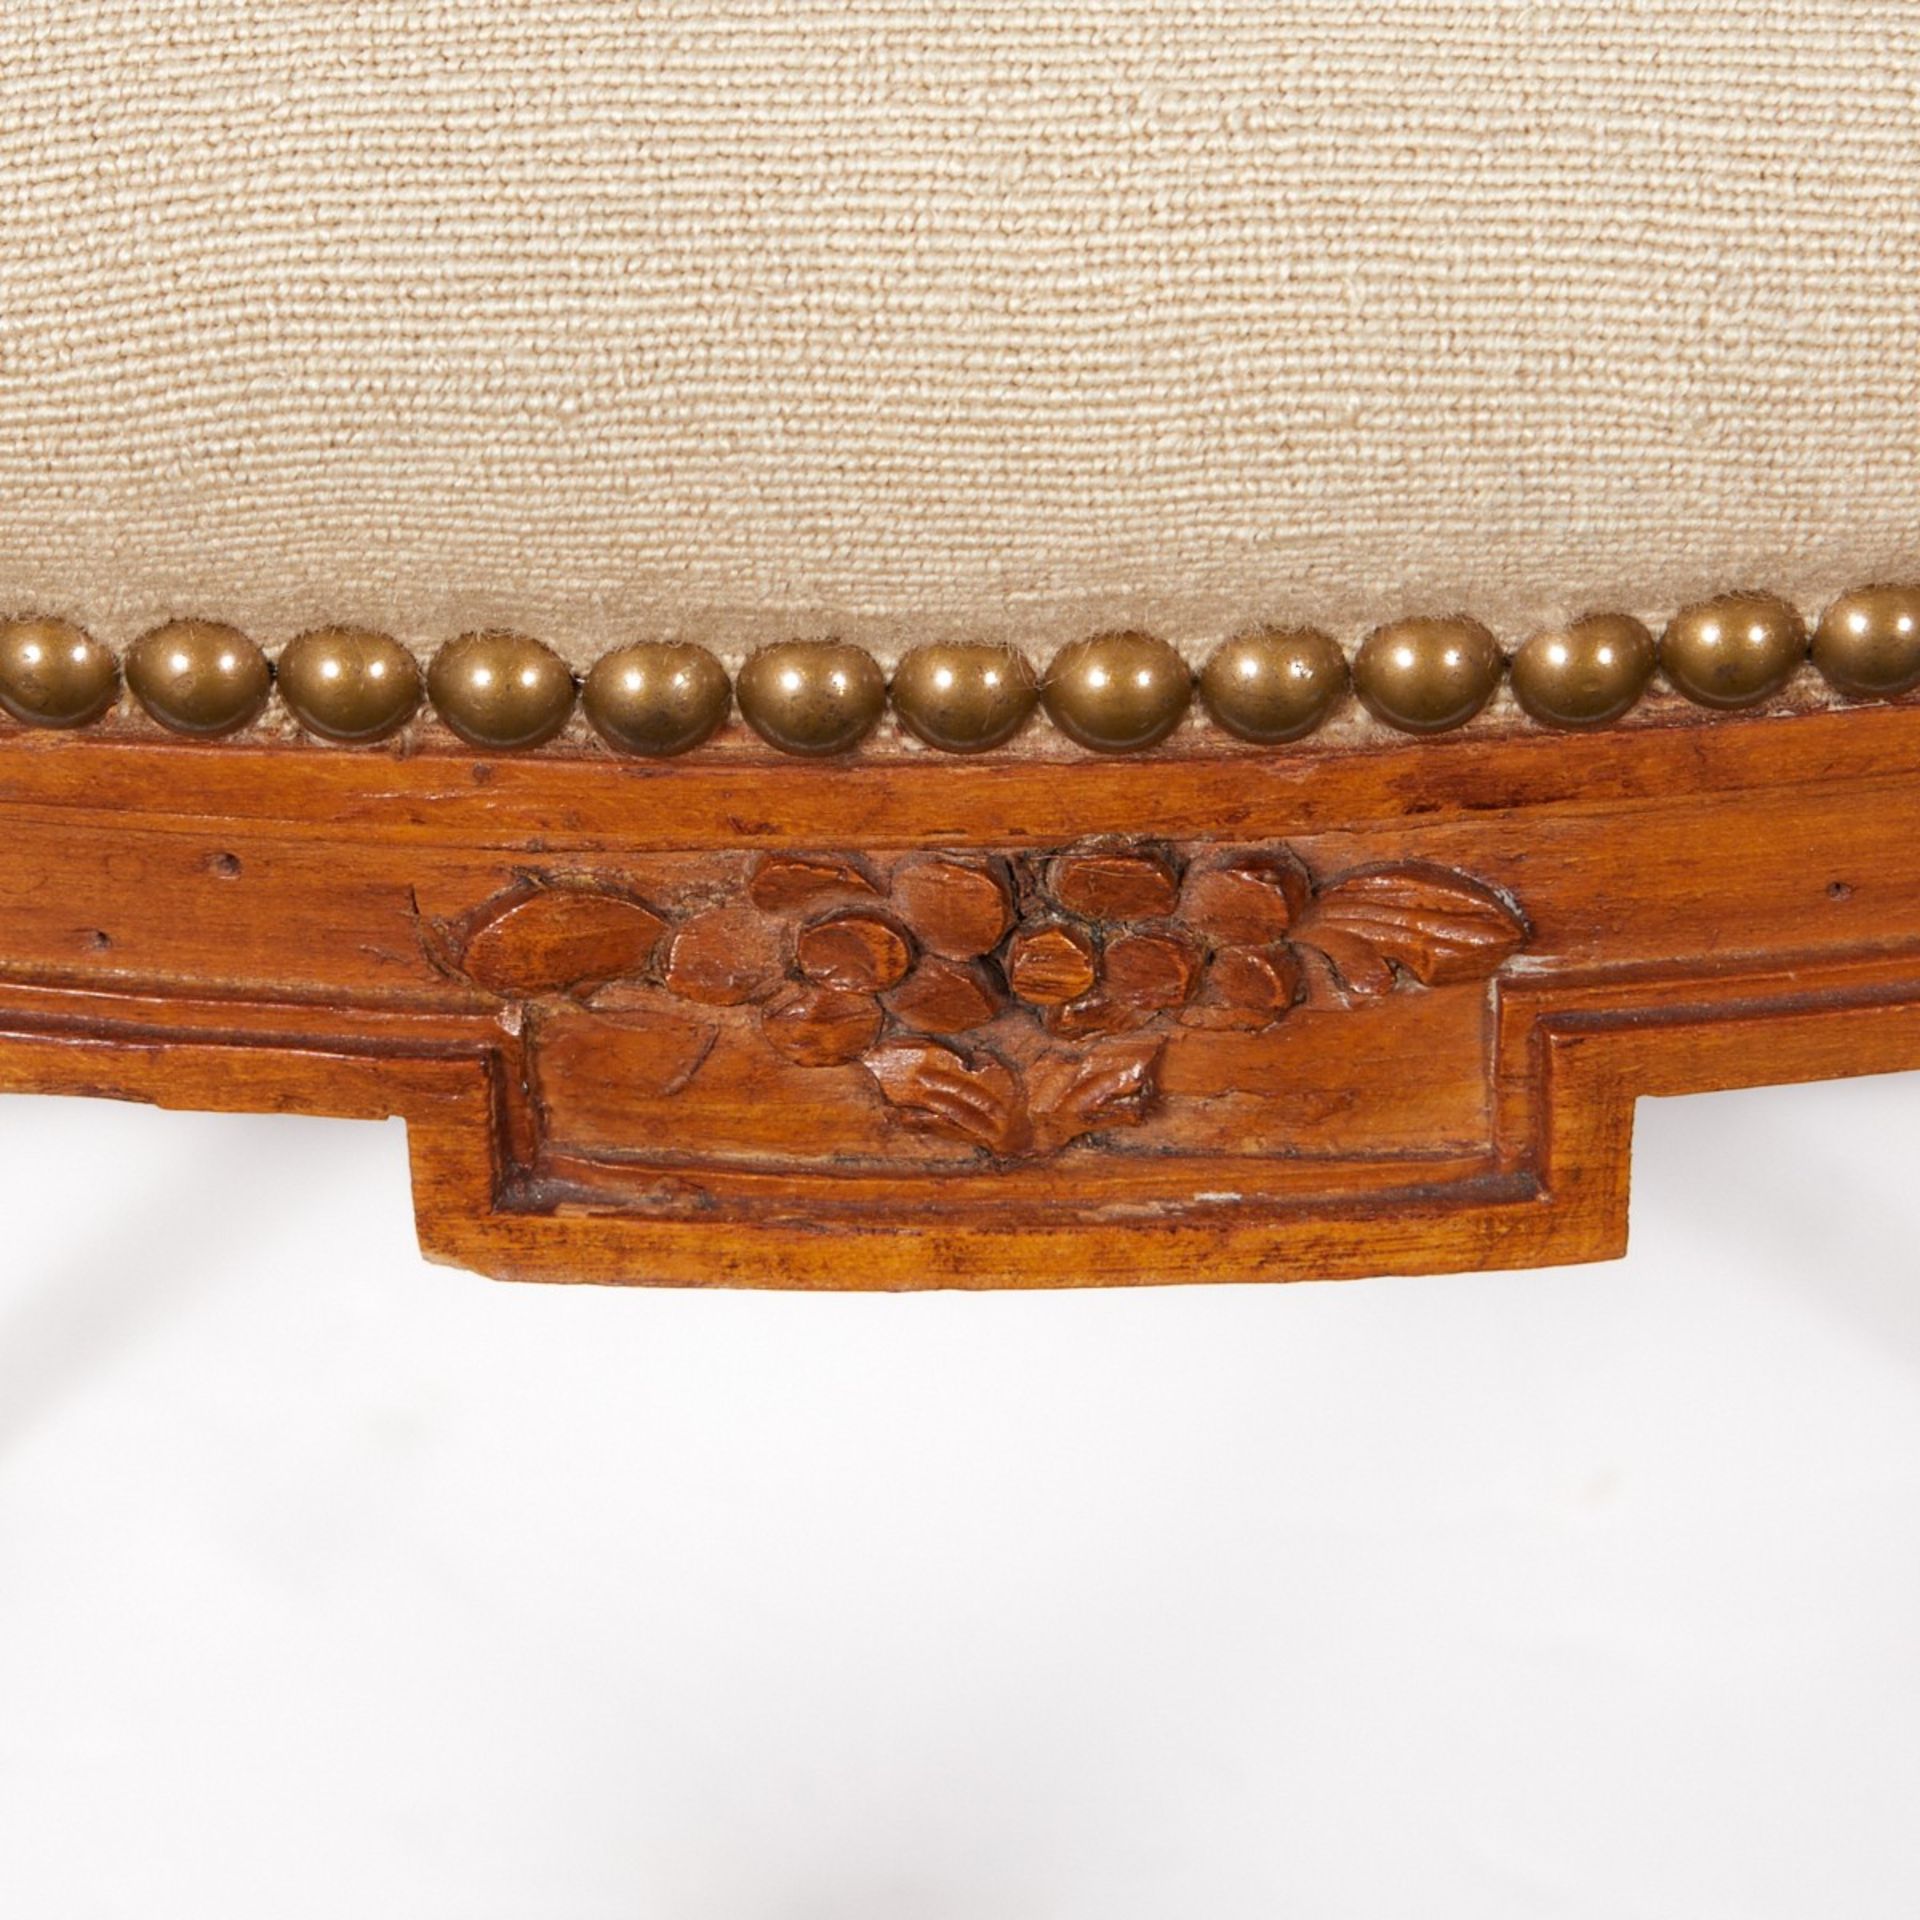 Pr French Side Chairs w/ Floral Decoration - Image 8 of 10